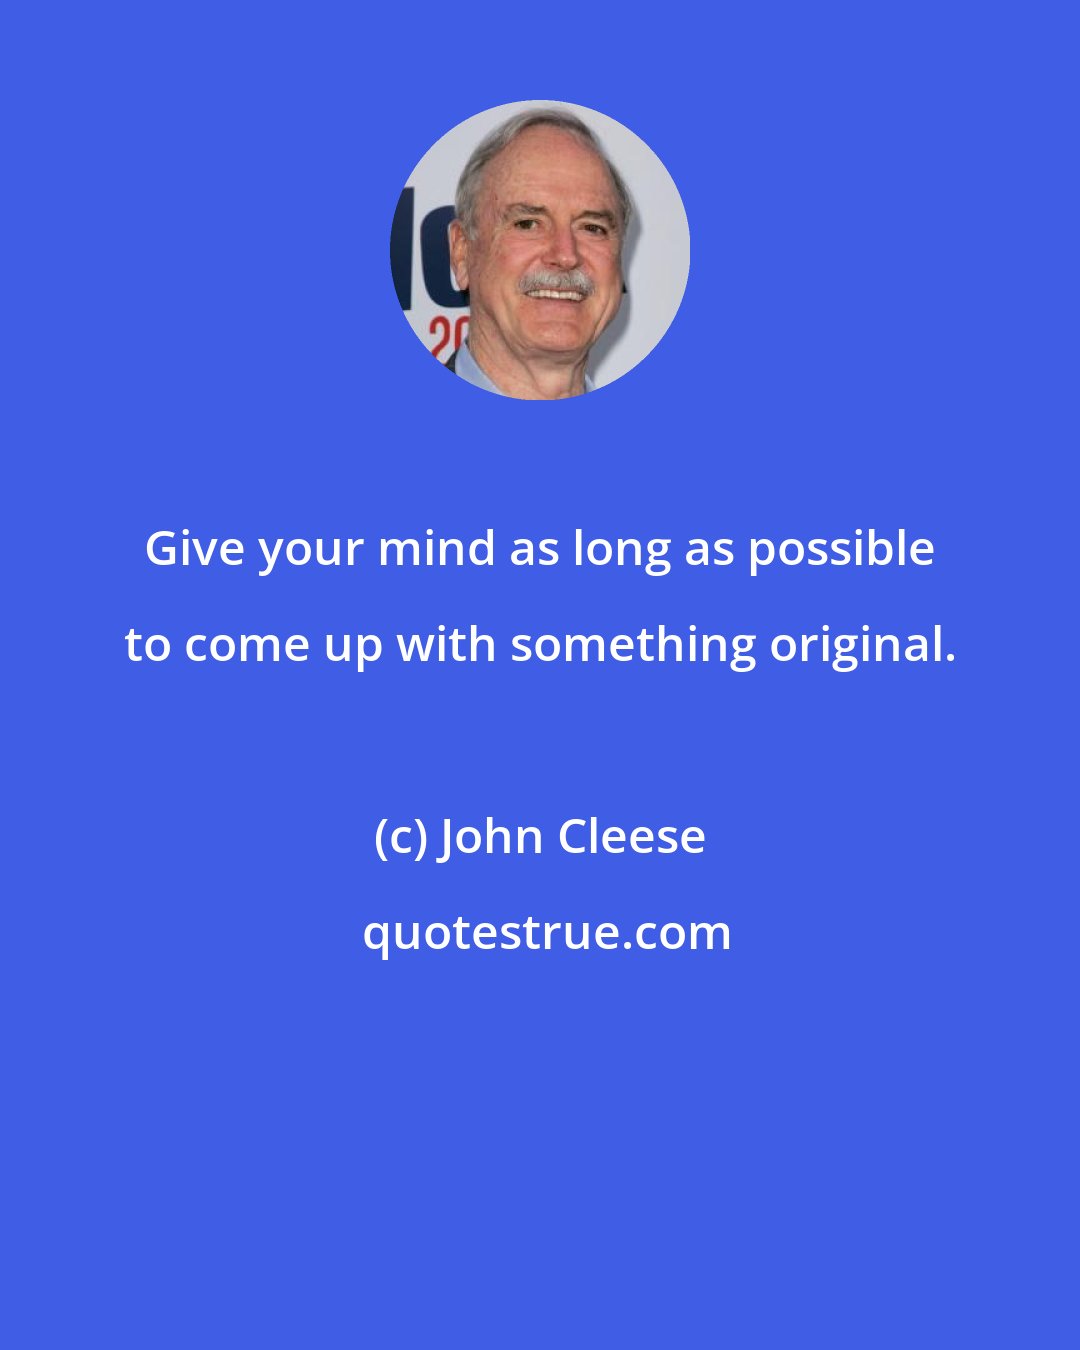 John Cleese: Give your mind as long as possible to come up with something original.